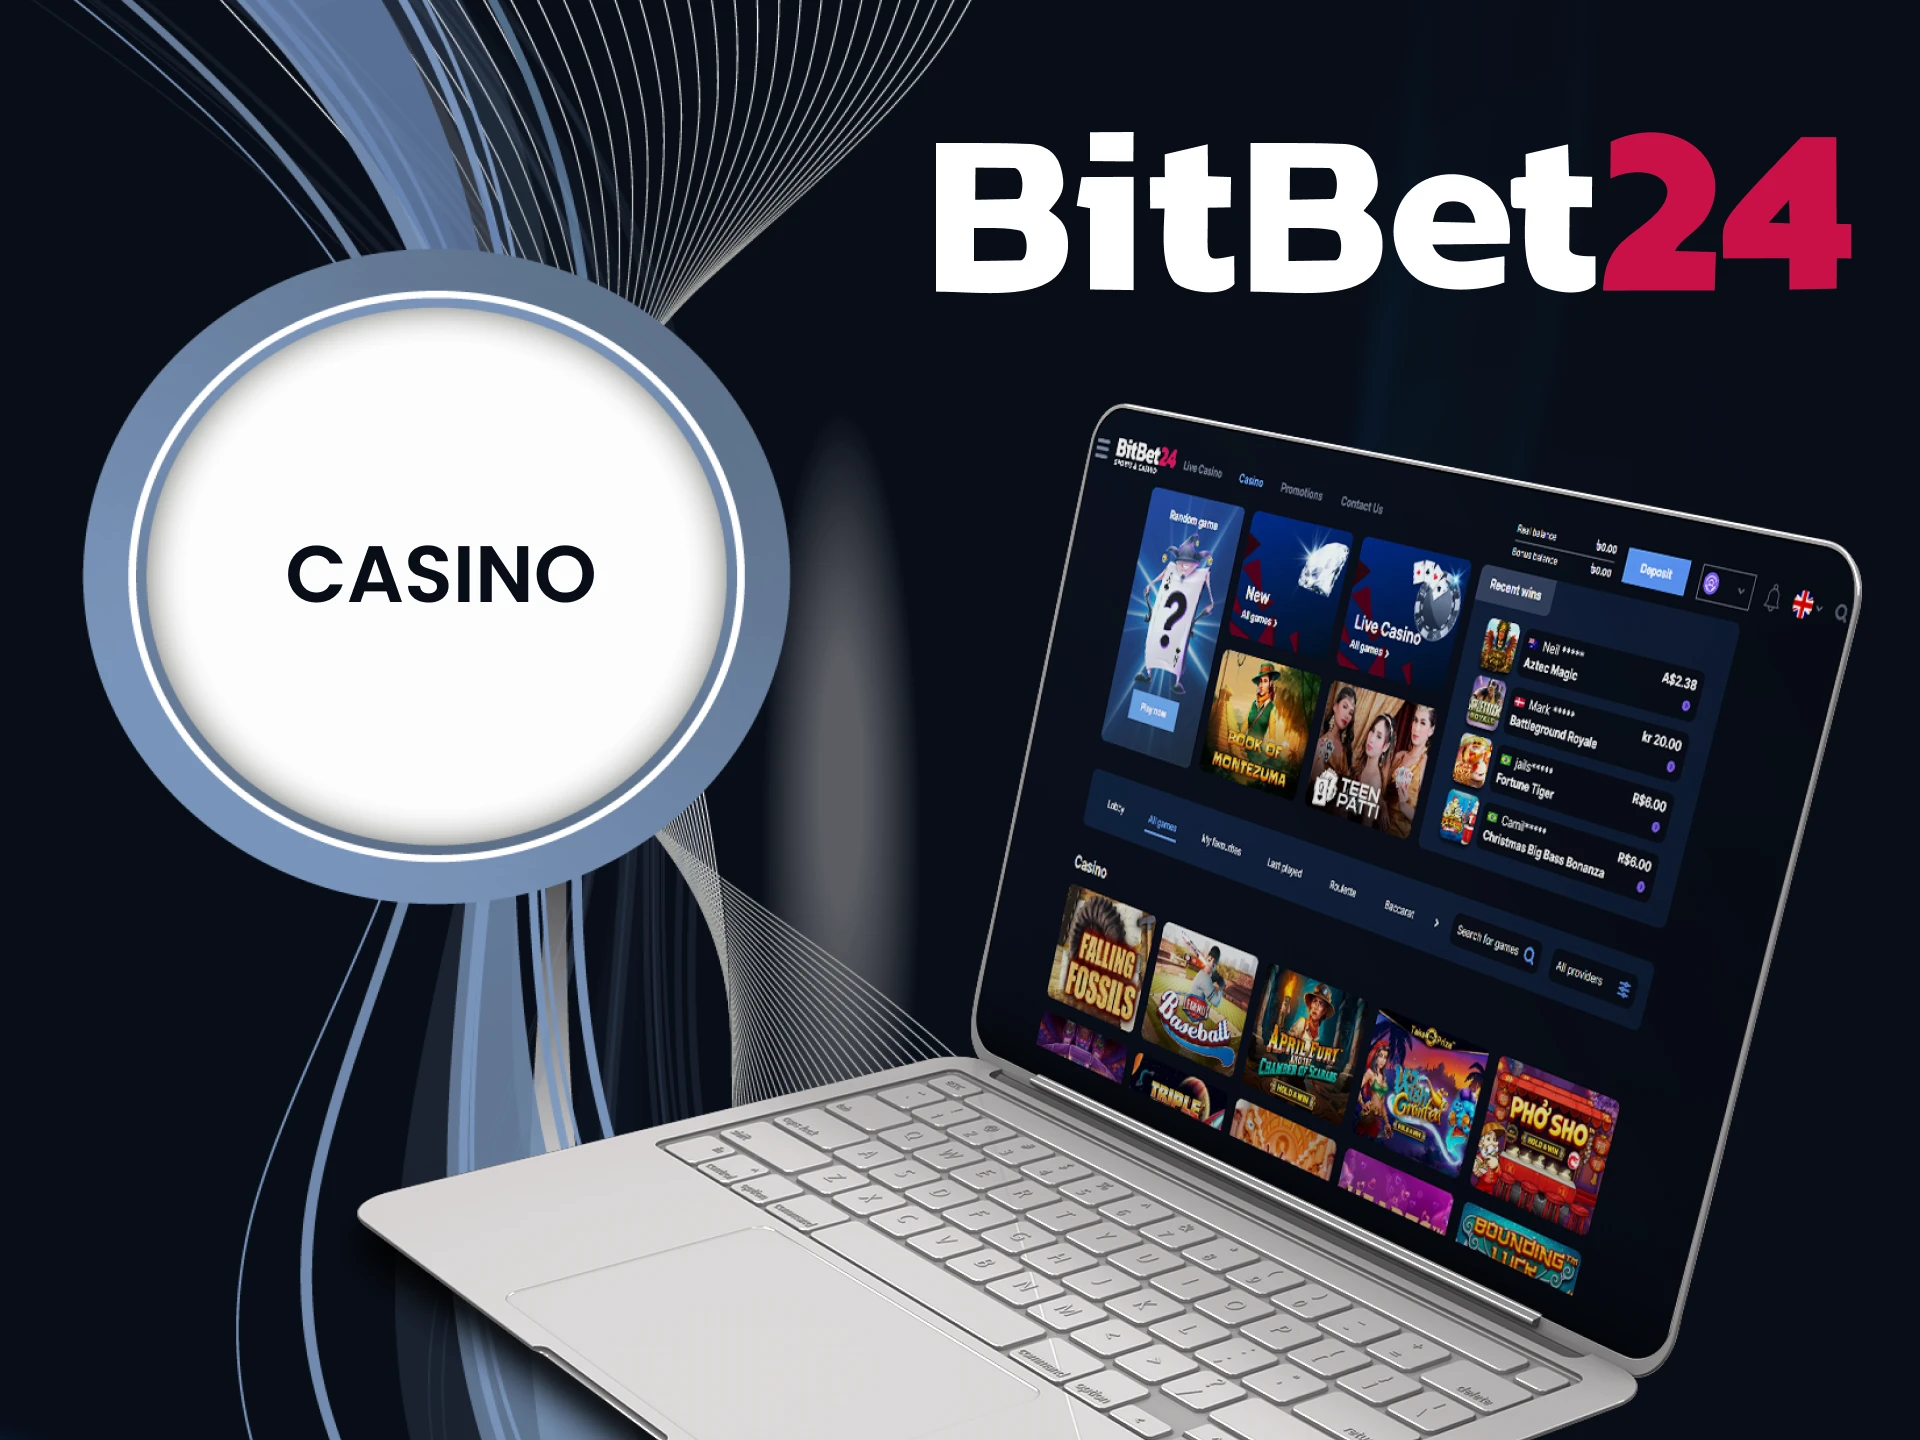 Play at the casino with BitBet24.